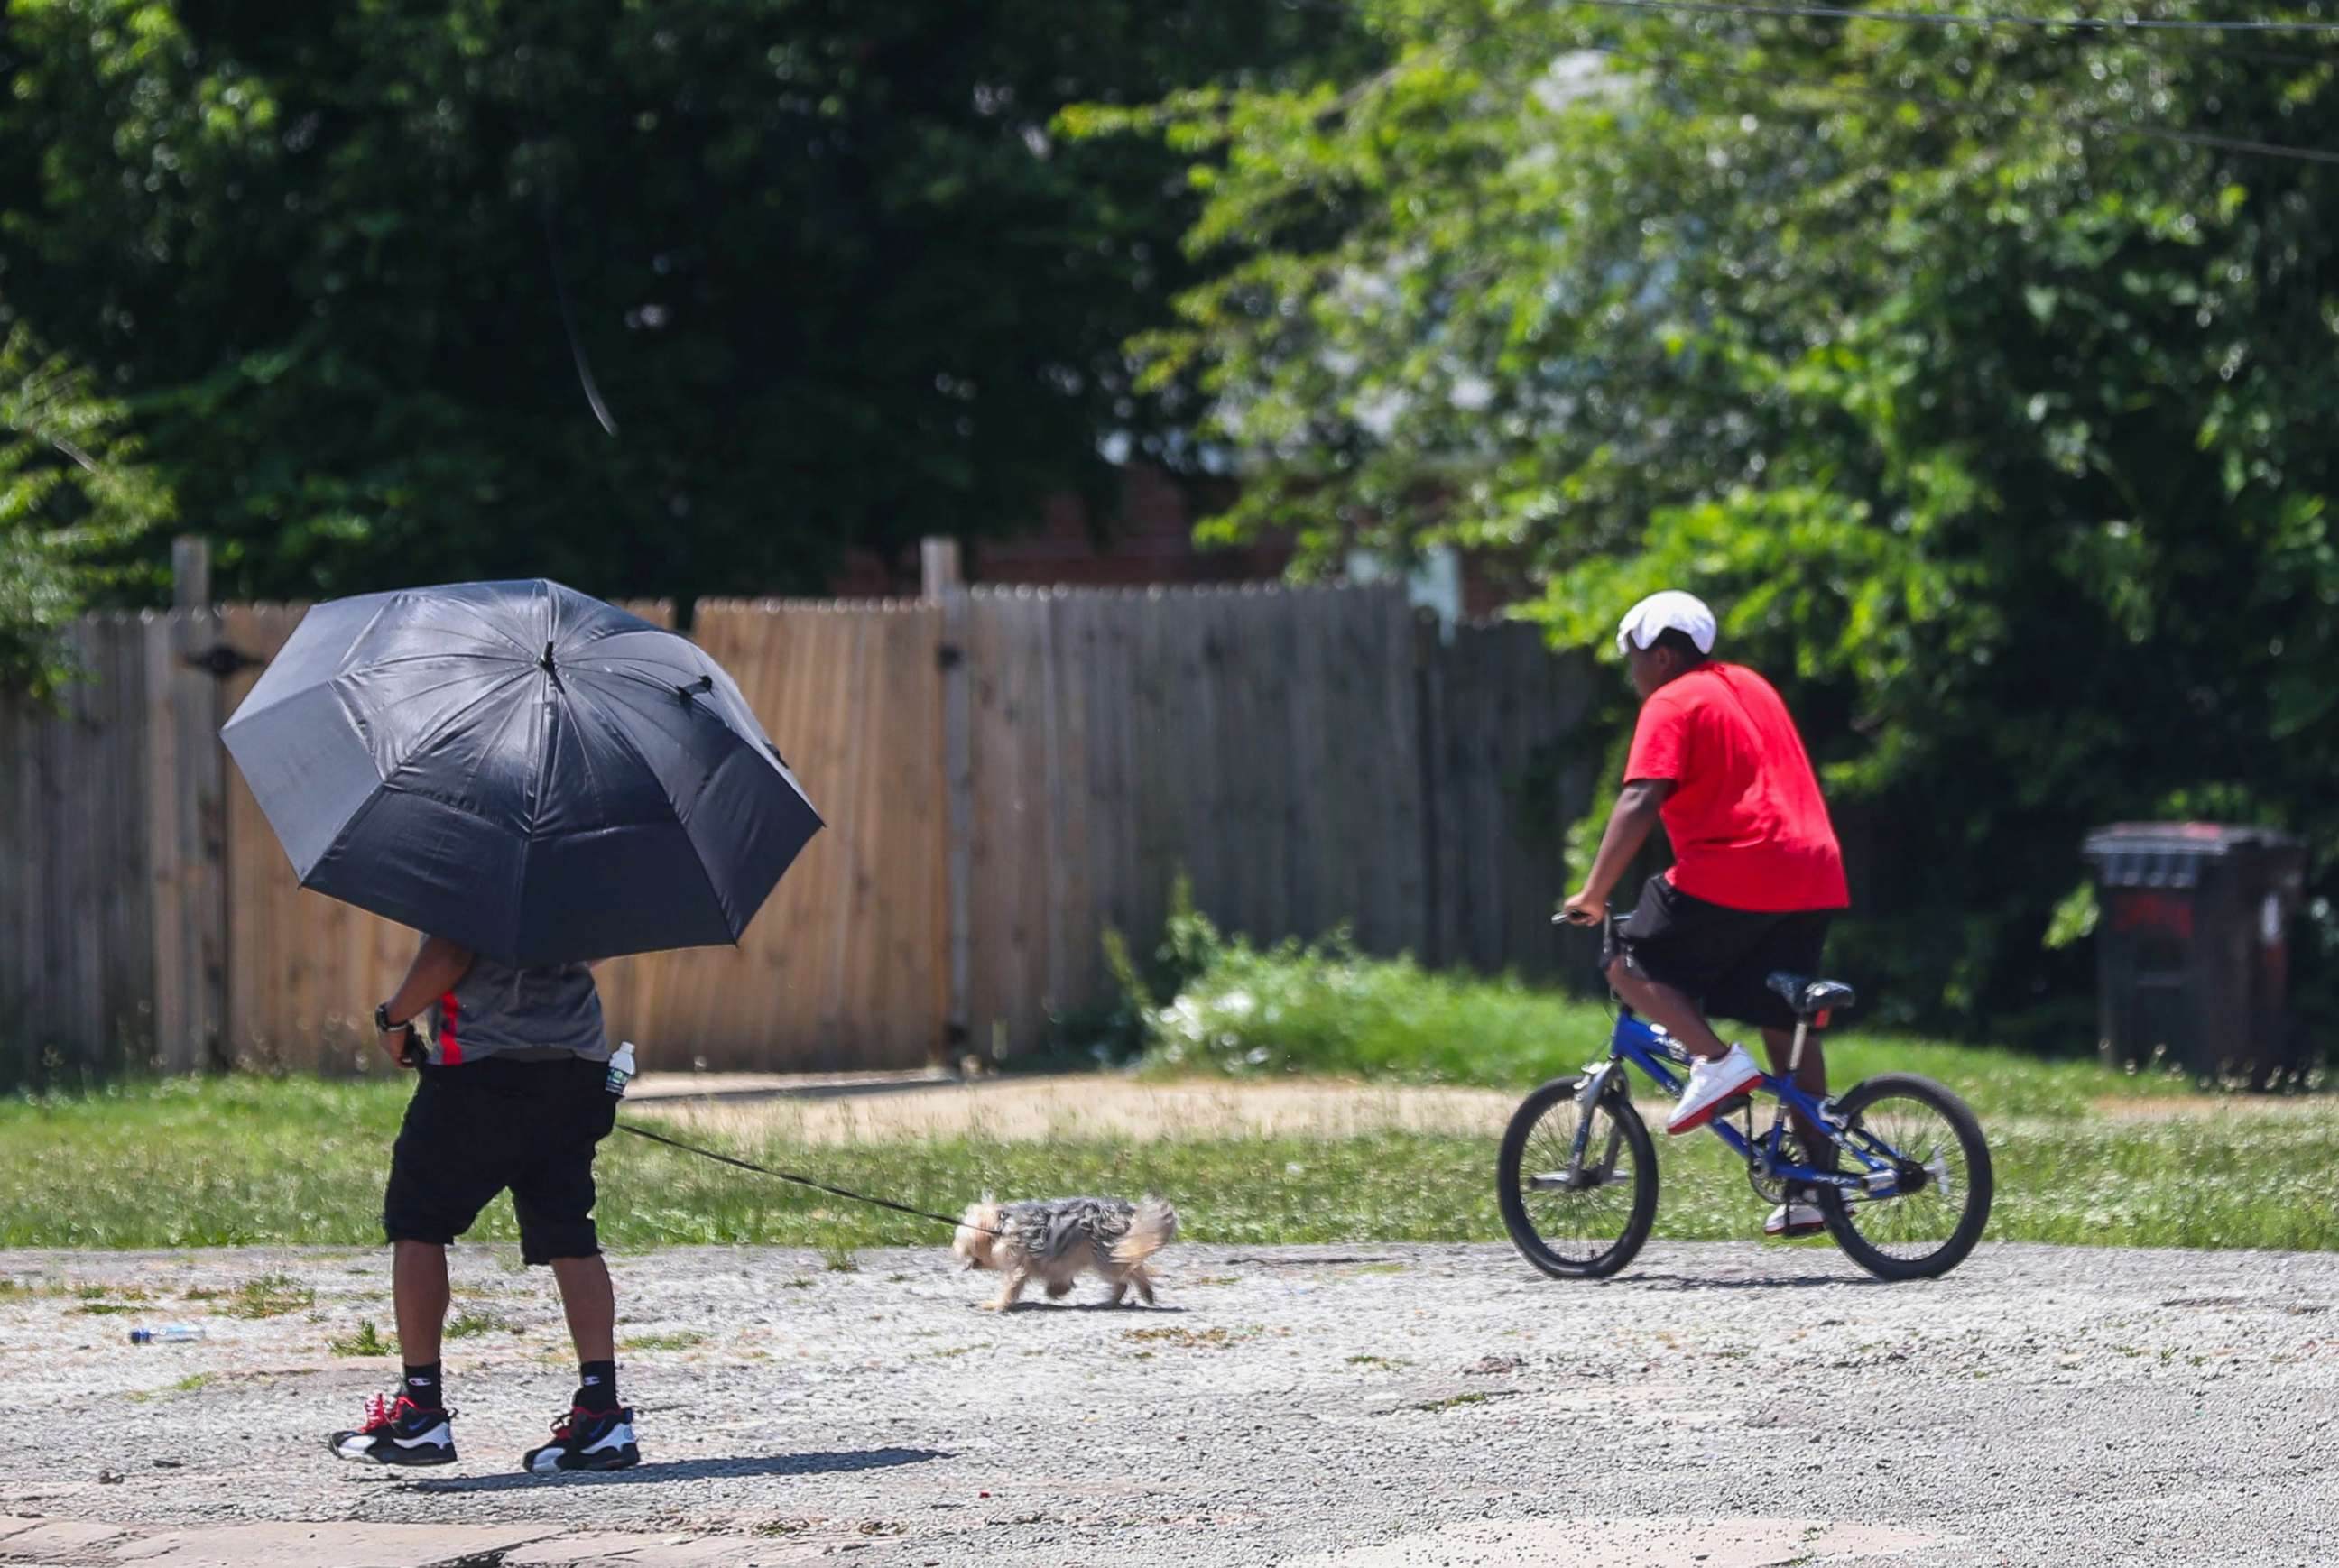 PHOTO: A pedestrian seeks shade under an umbrella as a rider bicycle keeps a wet cloth on his head while the pair head south on 34th Street in the Shawnee neighborhood of Louisville, Ky., June 14, 2022. 